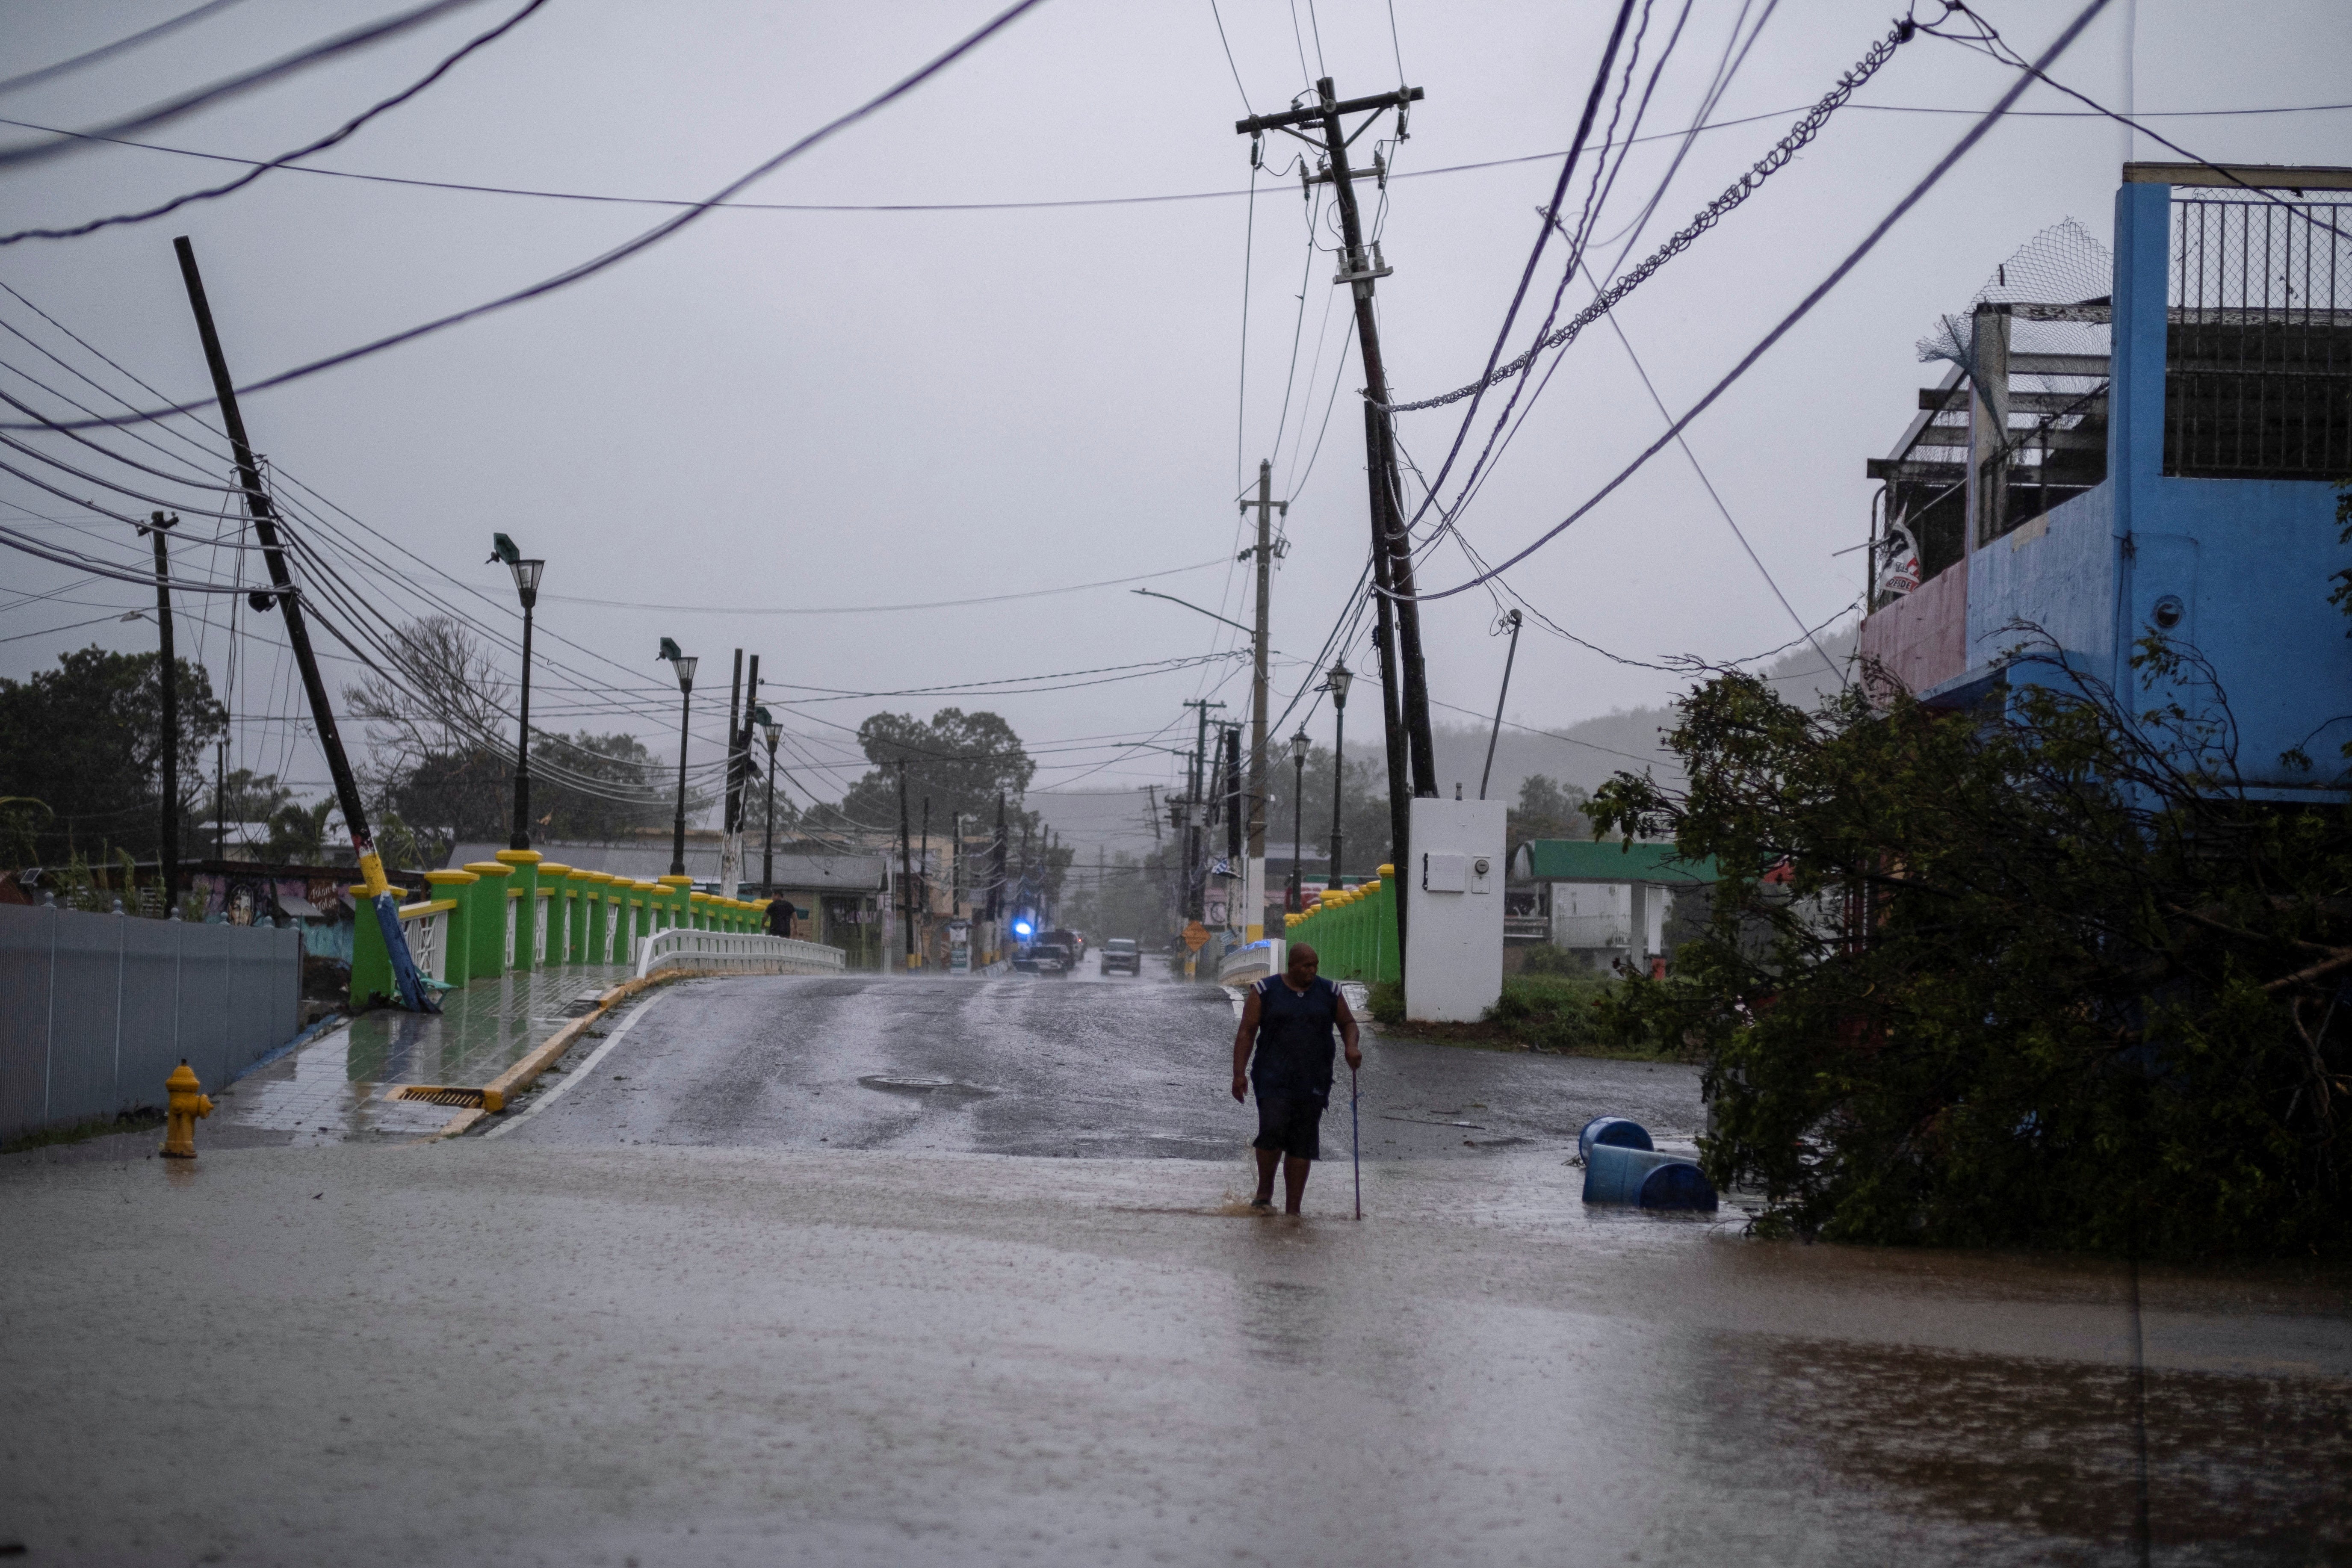 A man wades through a flooded street after Hurricane Fiona affected the area in Yauco, Puerto Rico